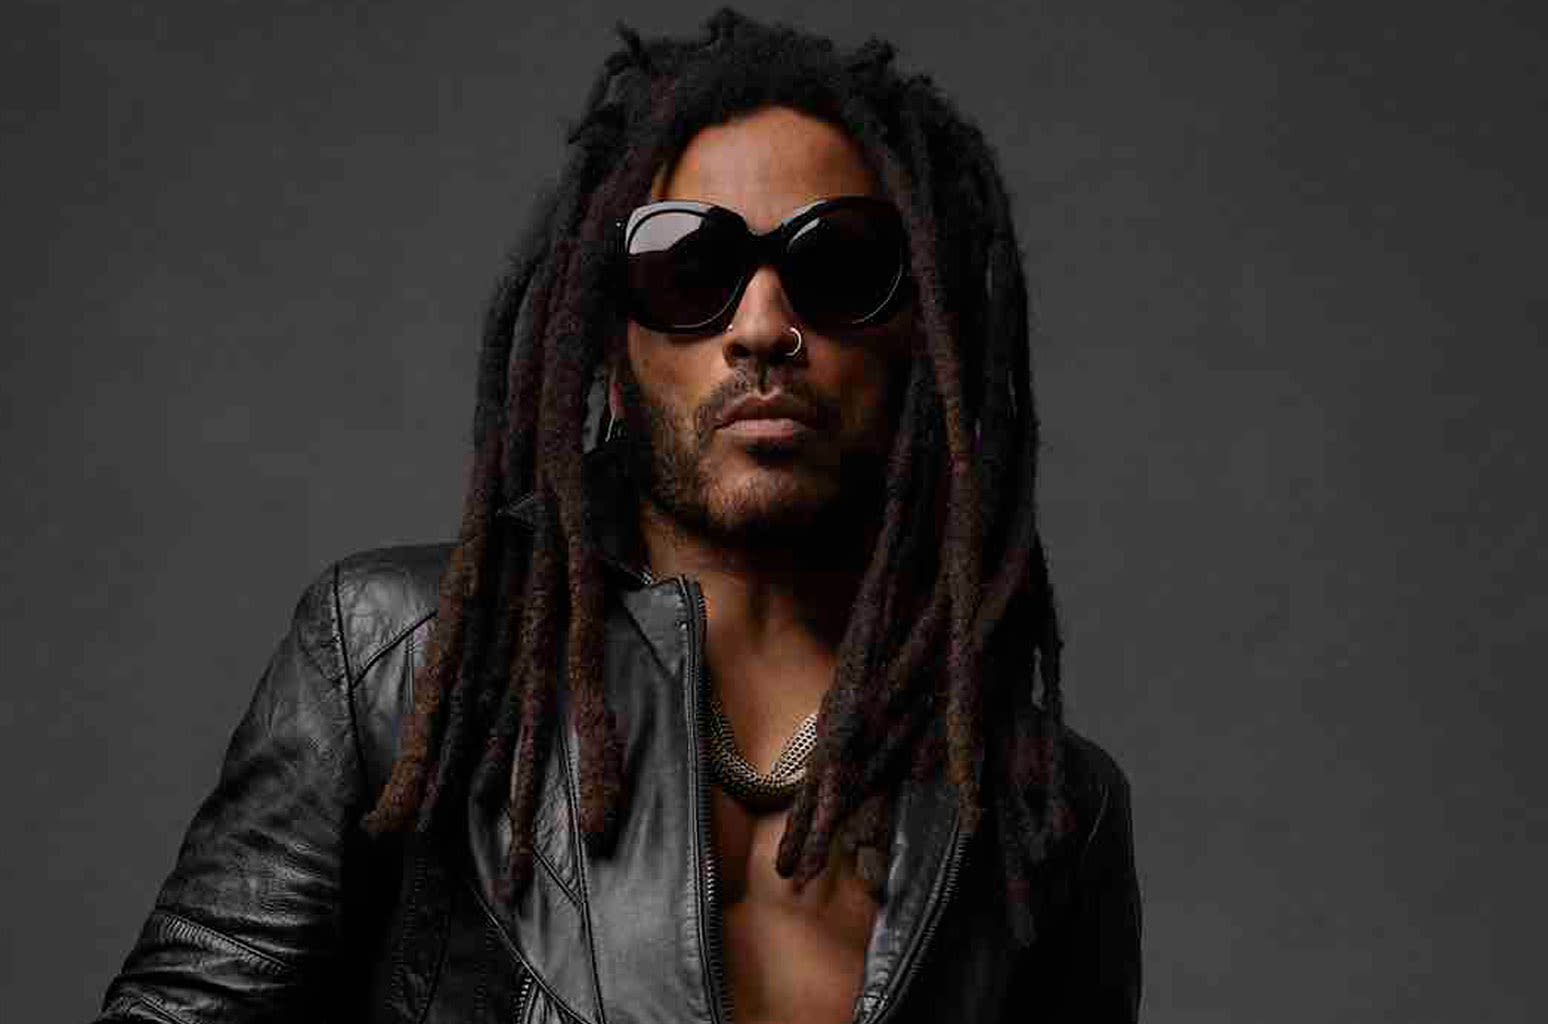 Lenny Kravitz Gives an Update on His 20-Year-Old Celibacy Vow: ‘It’s a Spiritual Thing’